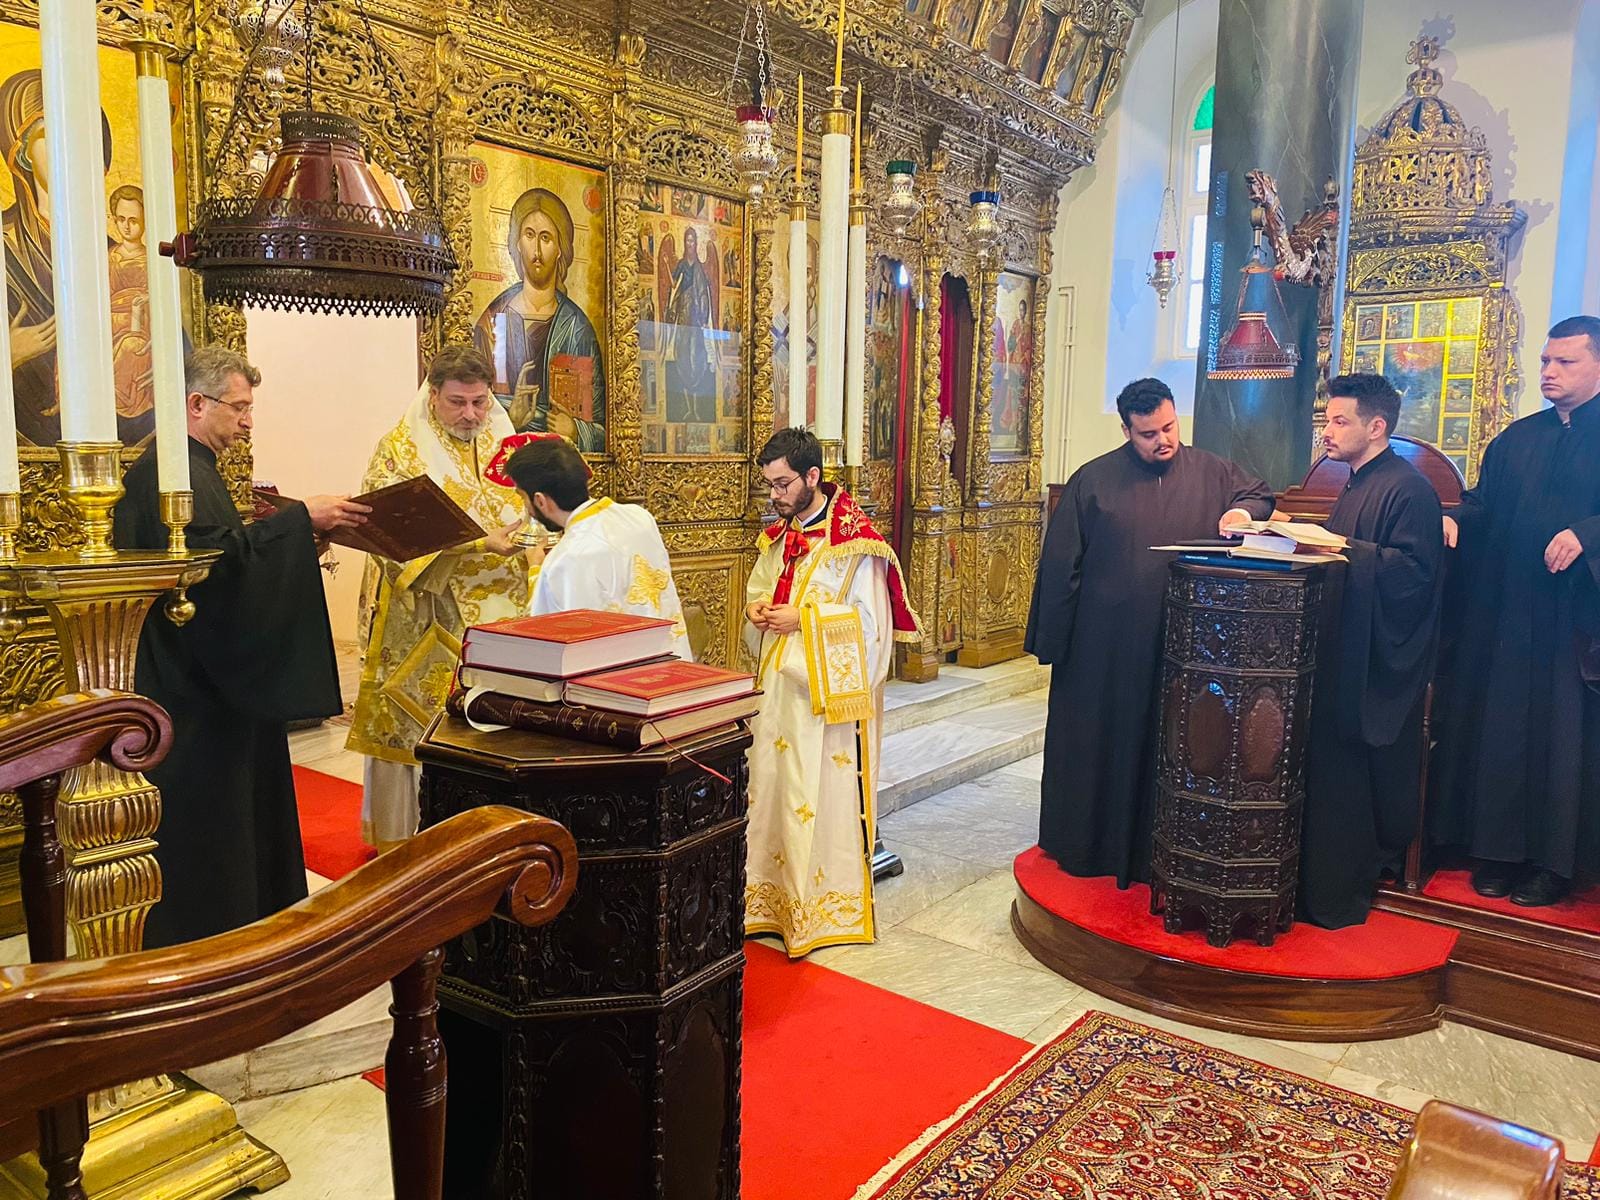 The Feast Day of Christmas at the Theological School of Halki